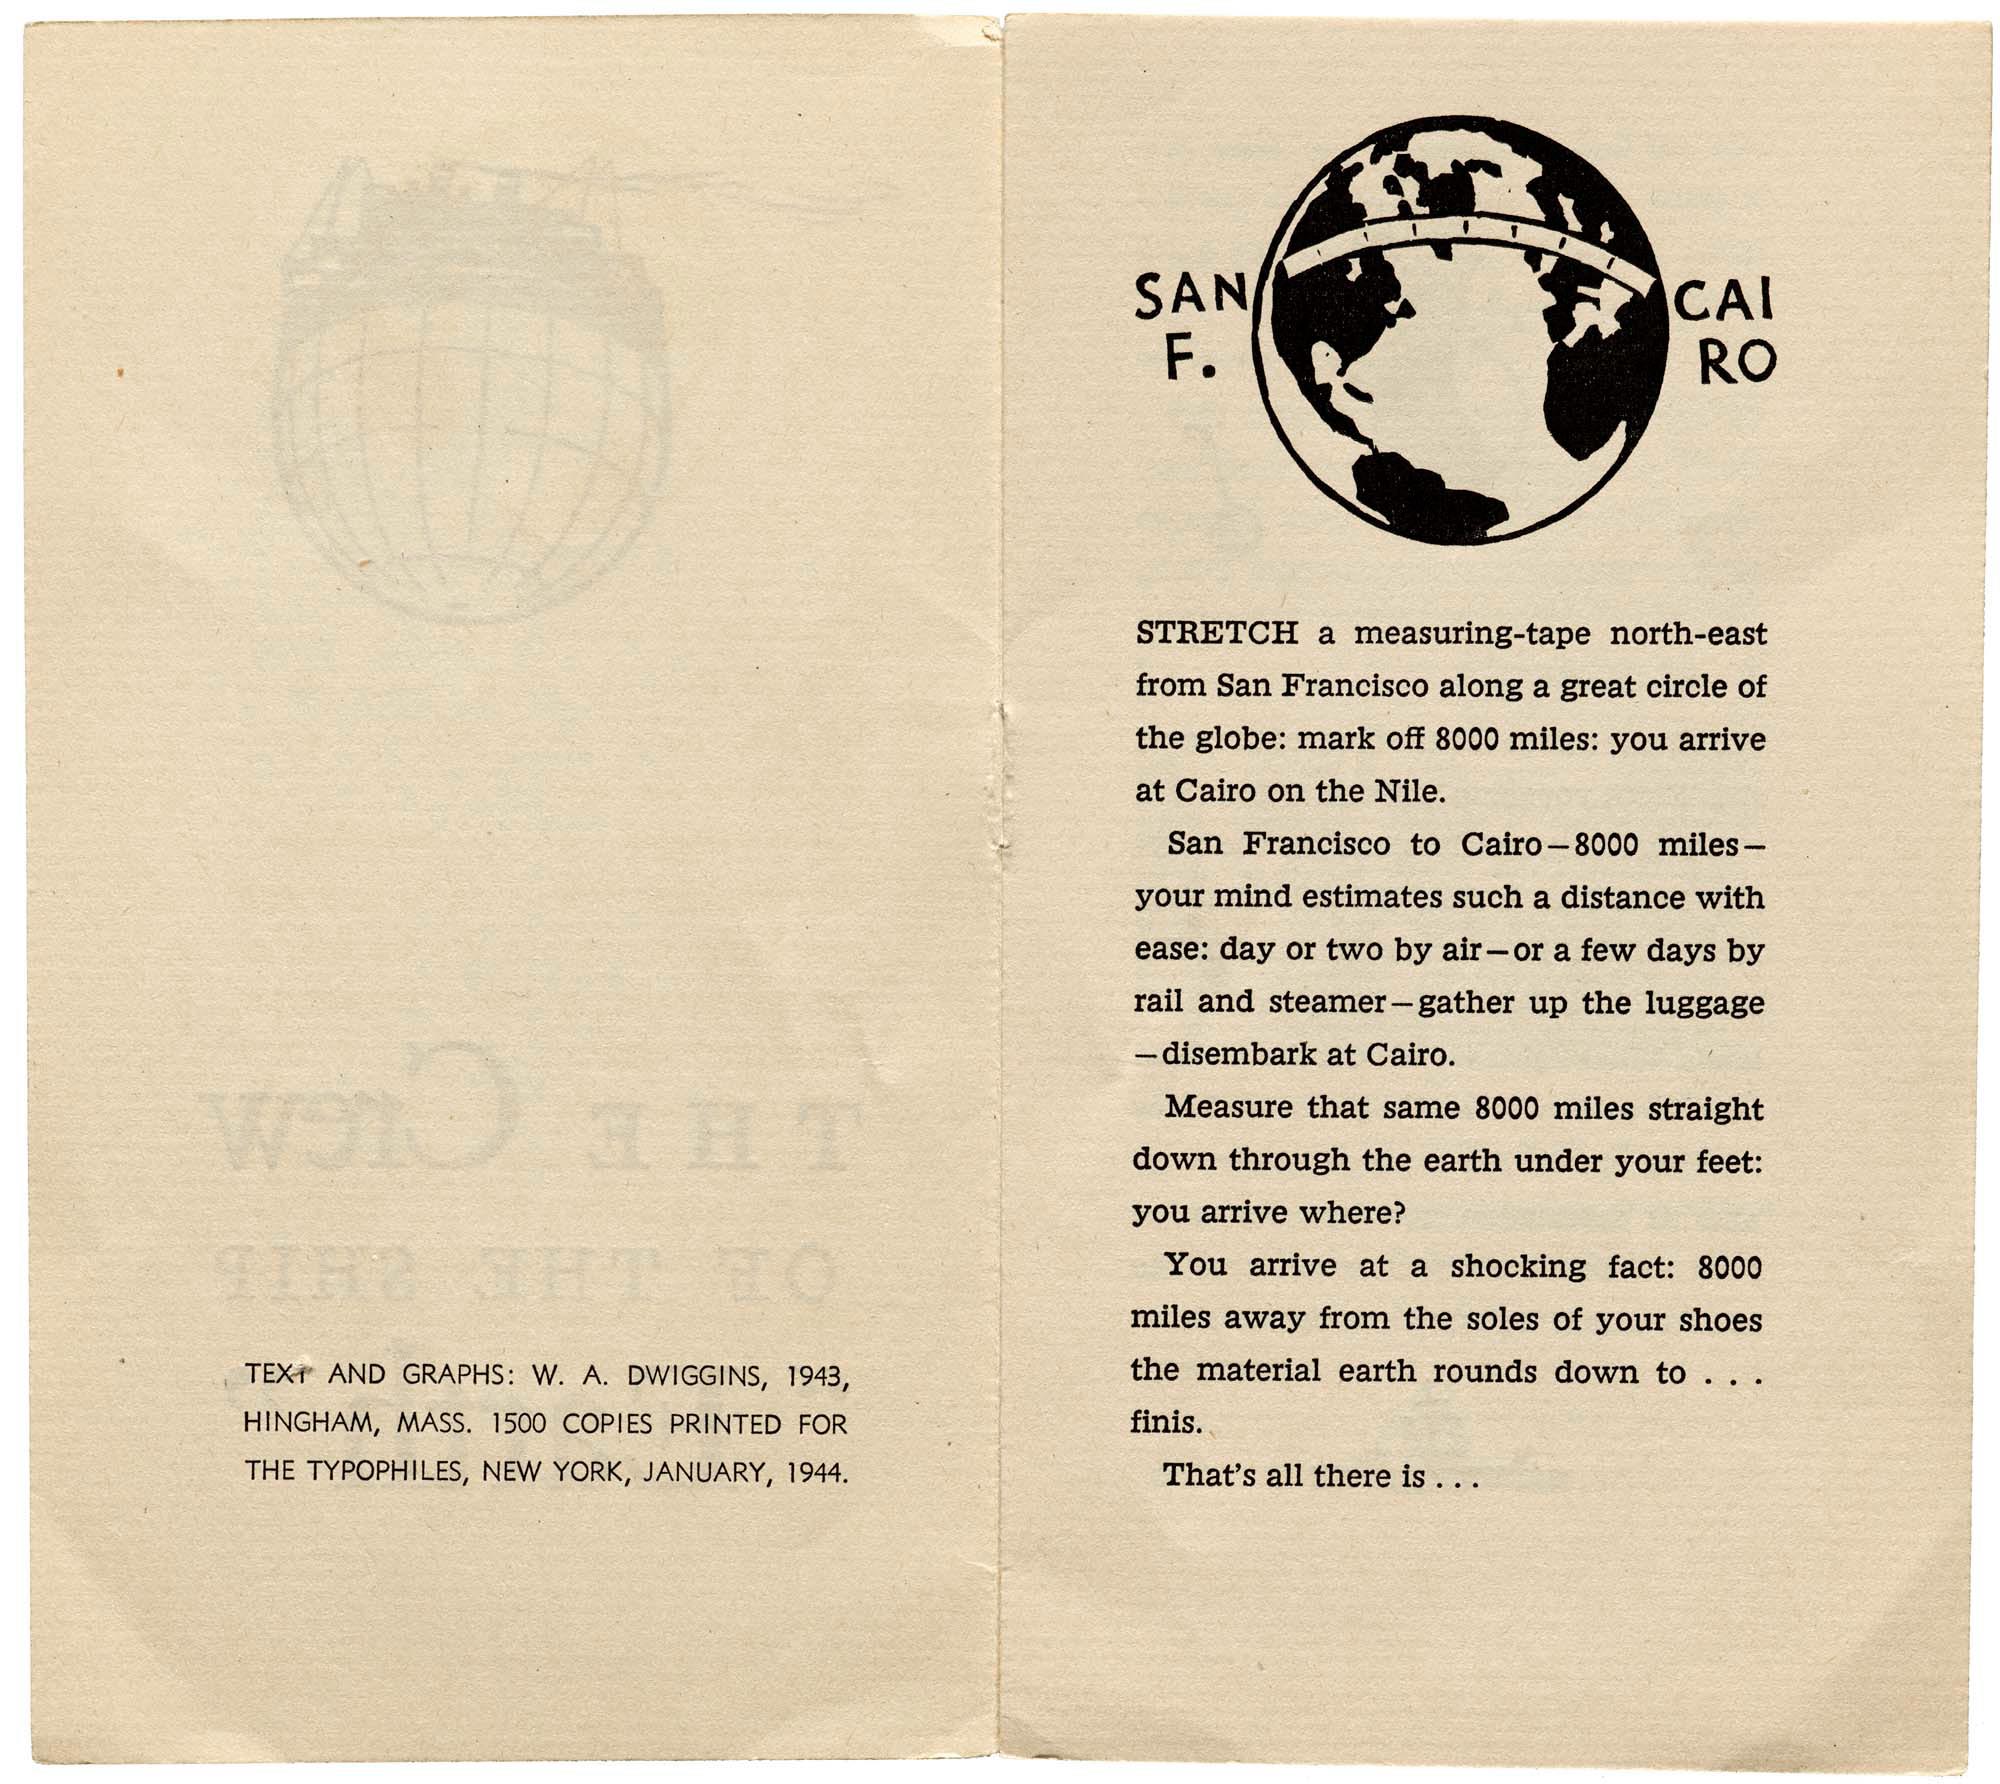 W. A. Dwiggins, Good Ship Earth, Typophiles, NY, 1943 - pages 2–3